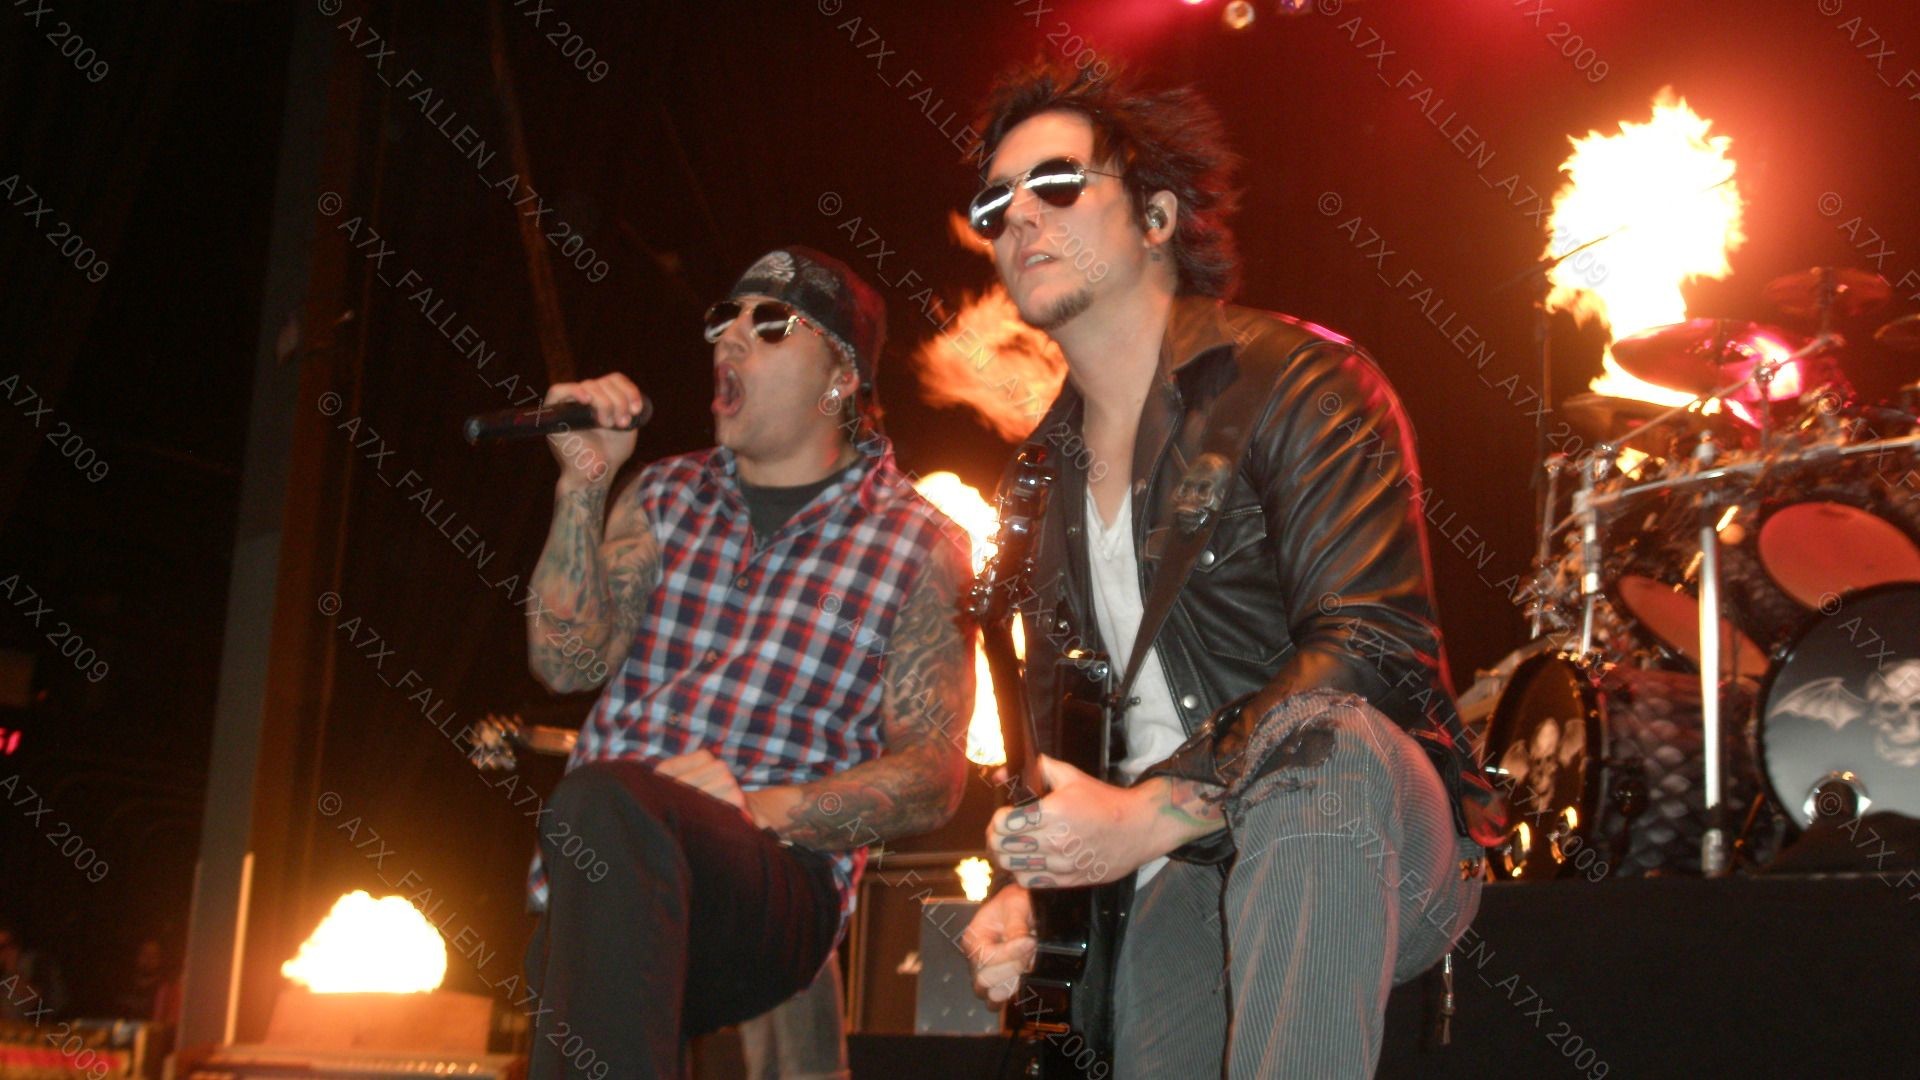 1920x1080 ... M.Shadows and Synyster Live 09 by FallenForLife